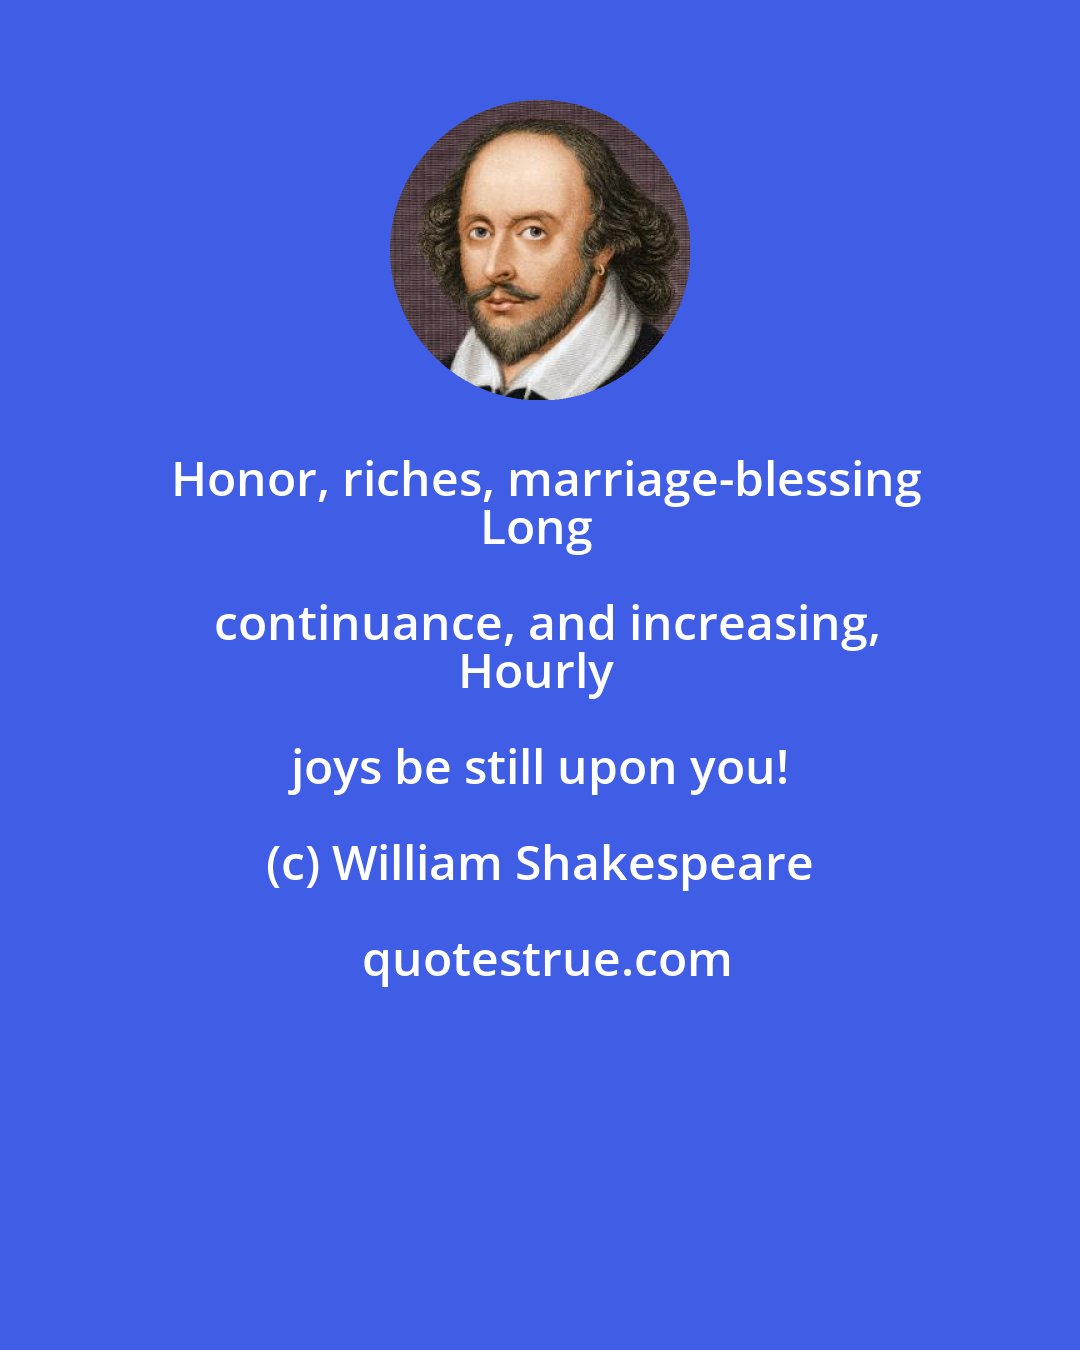 William Shakespeare: Honor, riches, marriage-blessing
Long continuance, and increasing,
Hourly joys be still upon you!